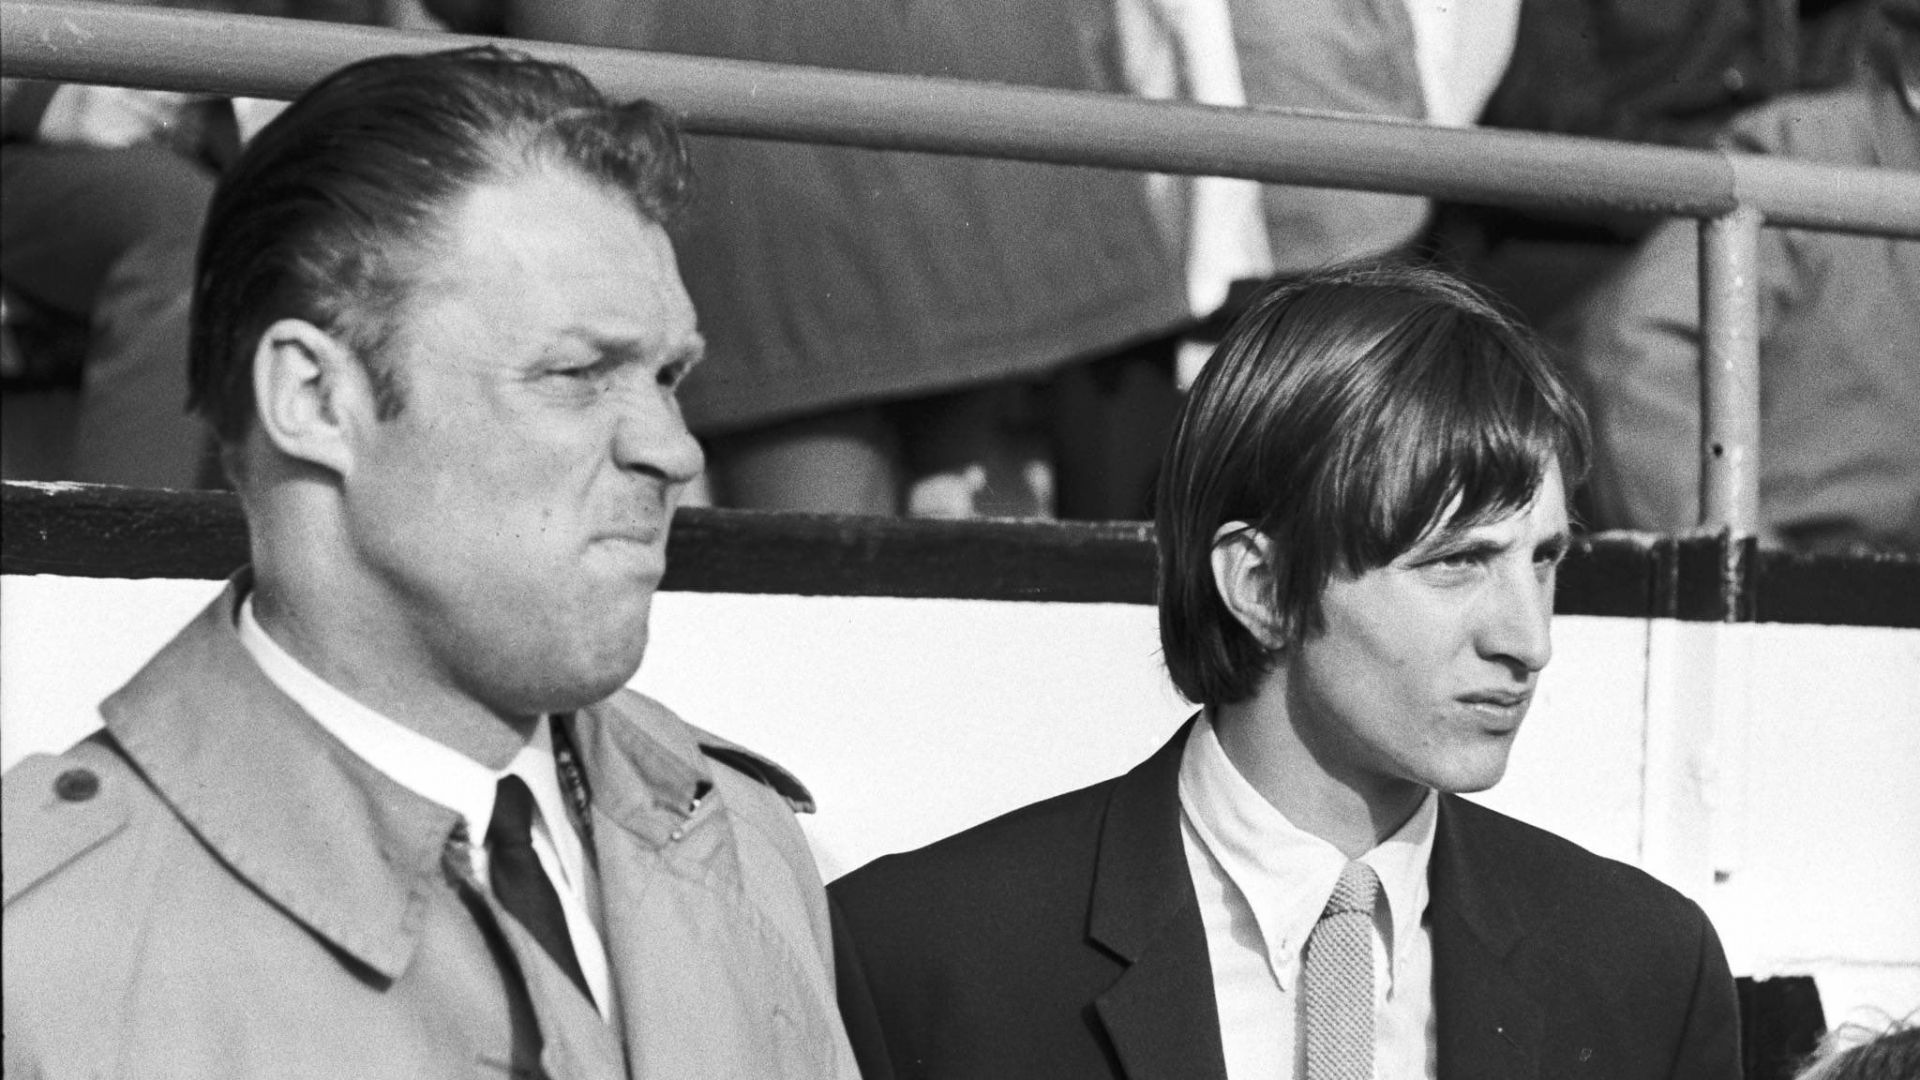 Rinus Michels and Johan Cruyff formed a deadly duo for both club and country